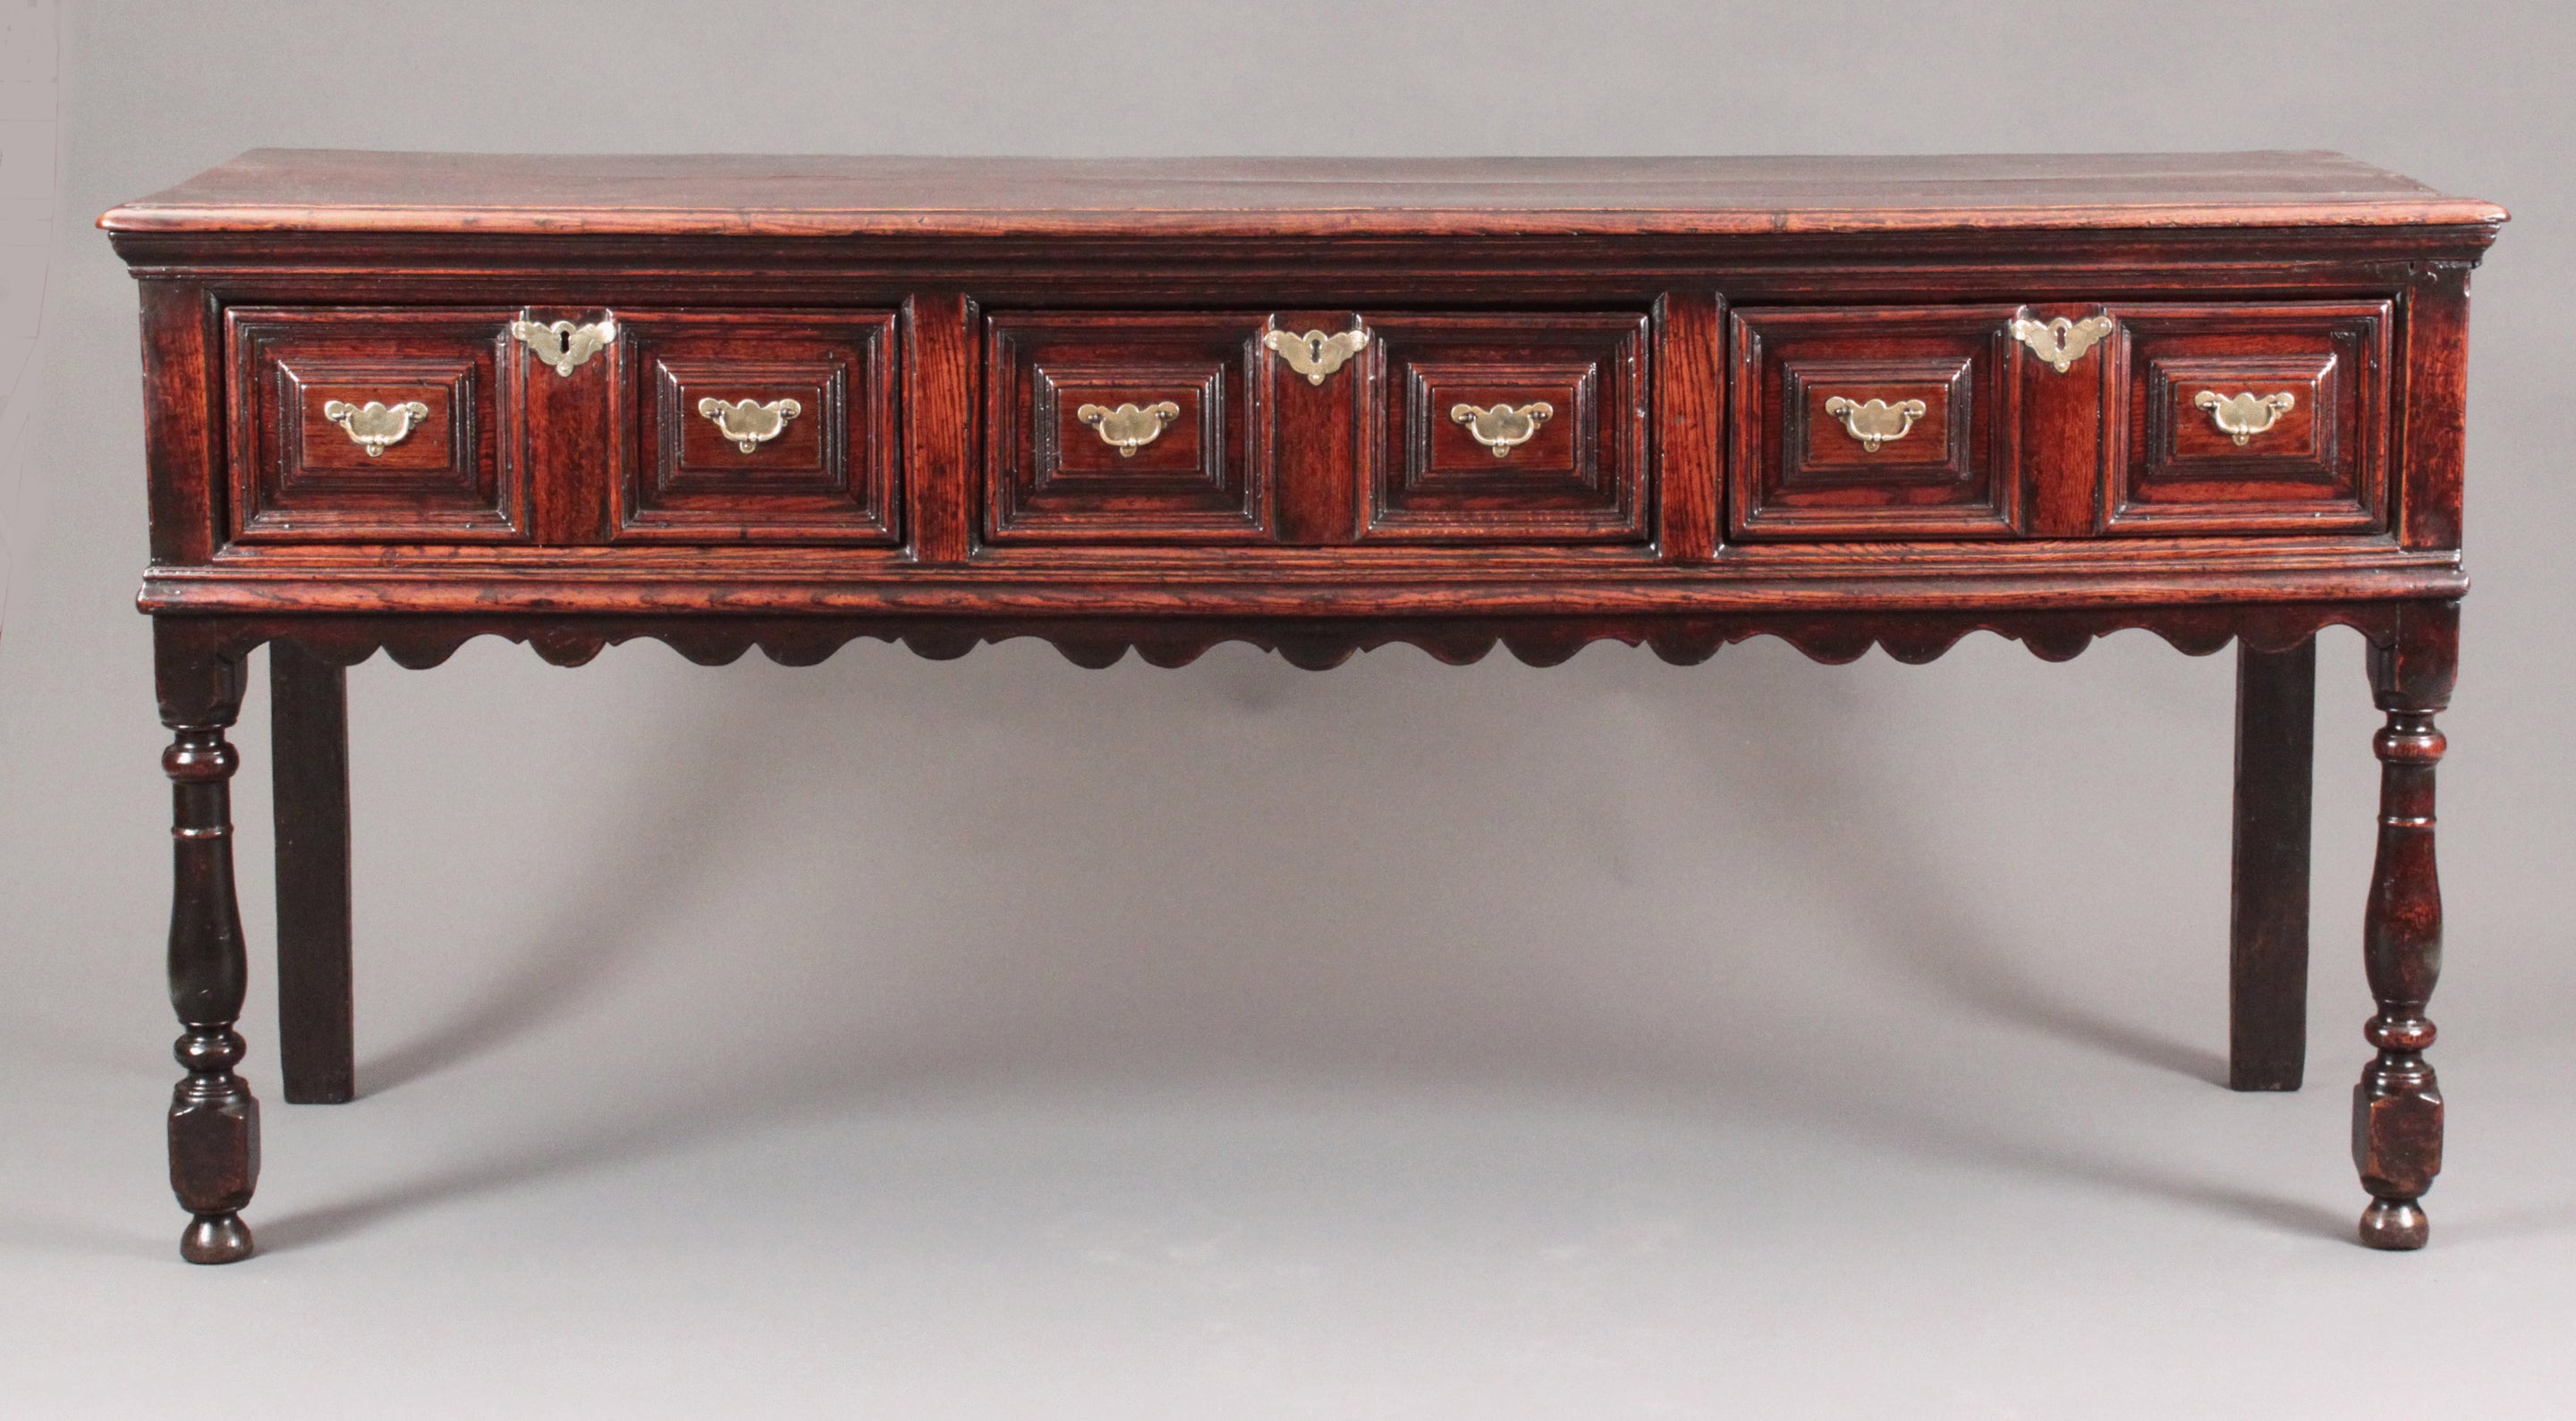 A fine William and Mary moulded front serving dresser